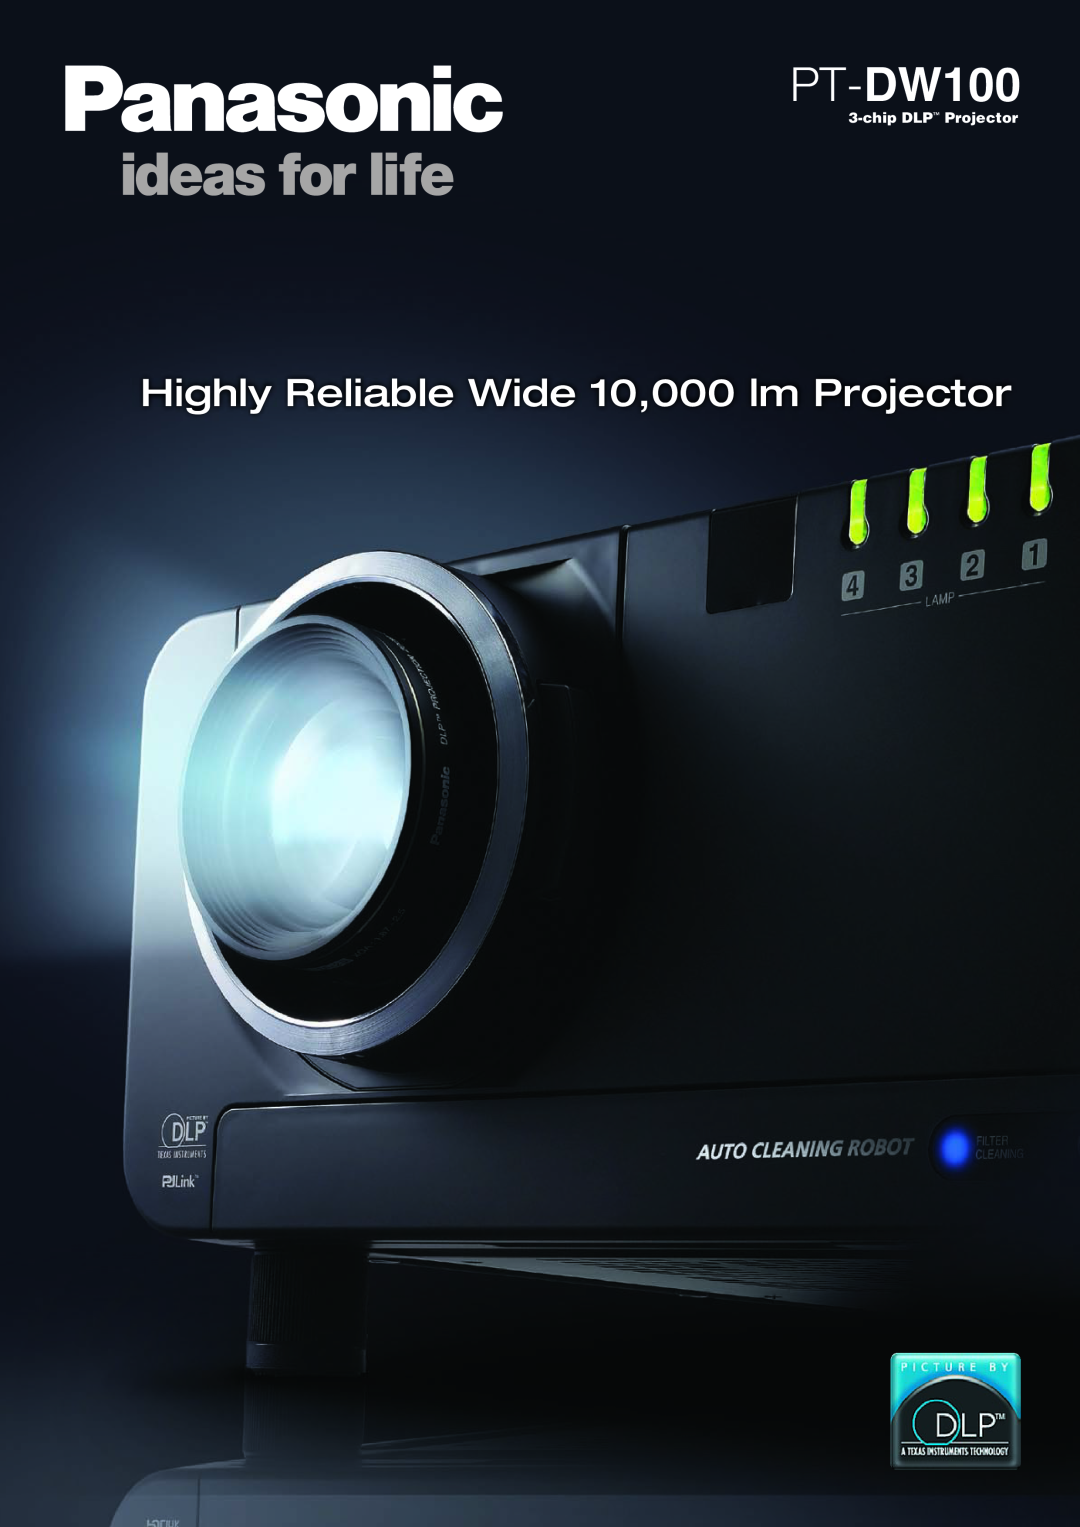 Panasonic PT-DW100 specifications Highly Reliable Wide 10,000 lm Projector, chip DLP Projector 